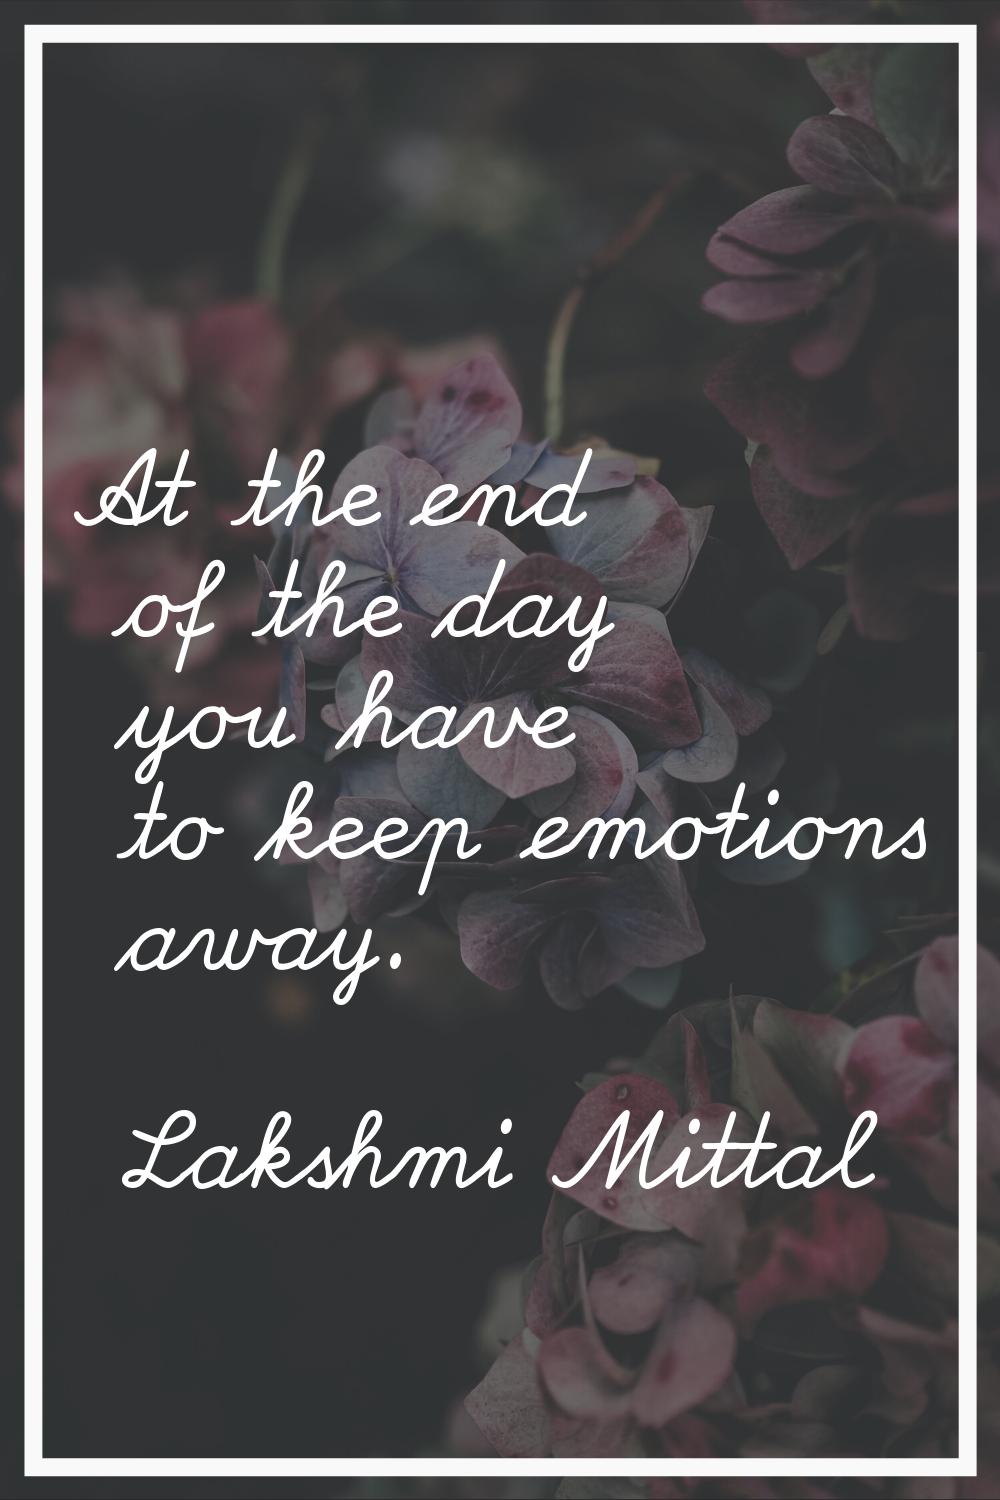 At the end of the day you have to keep emotions away.